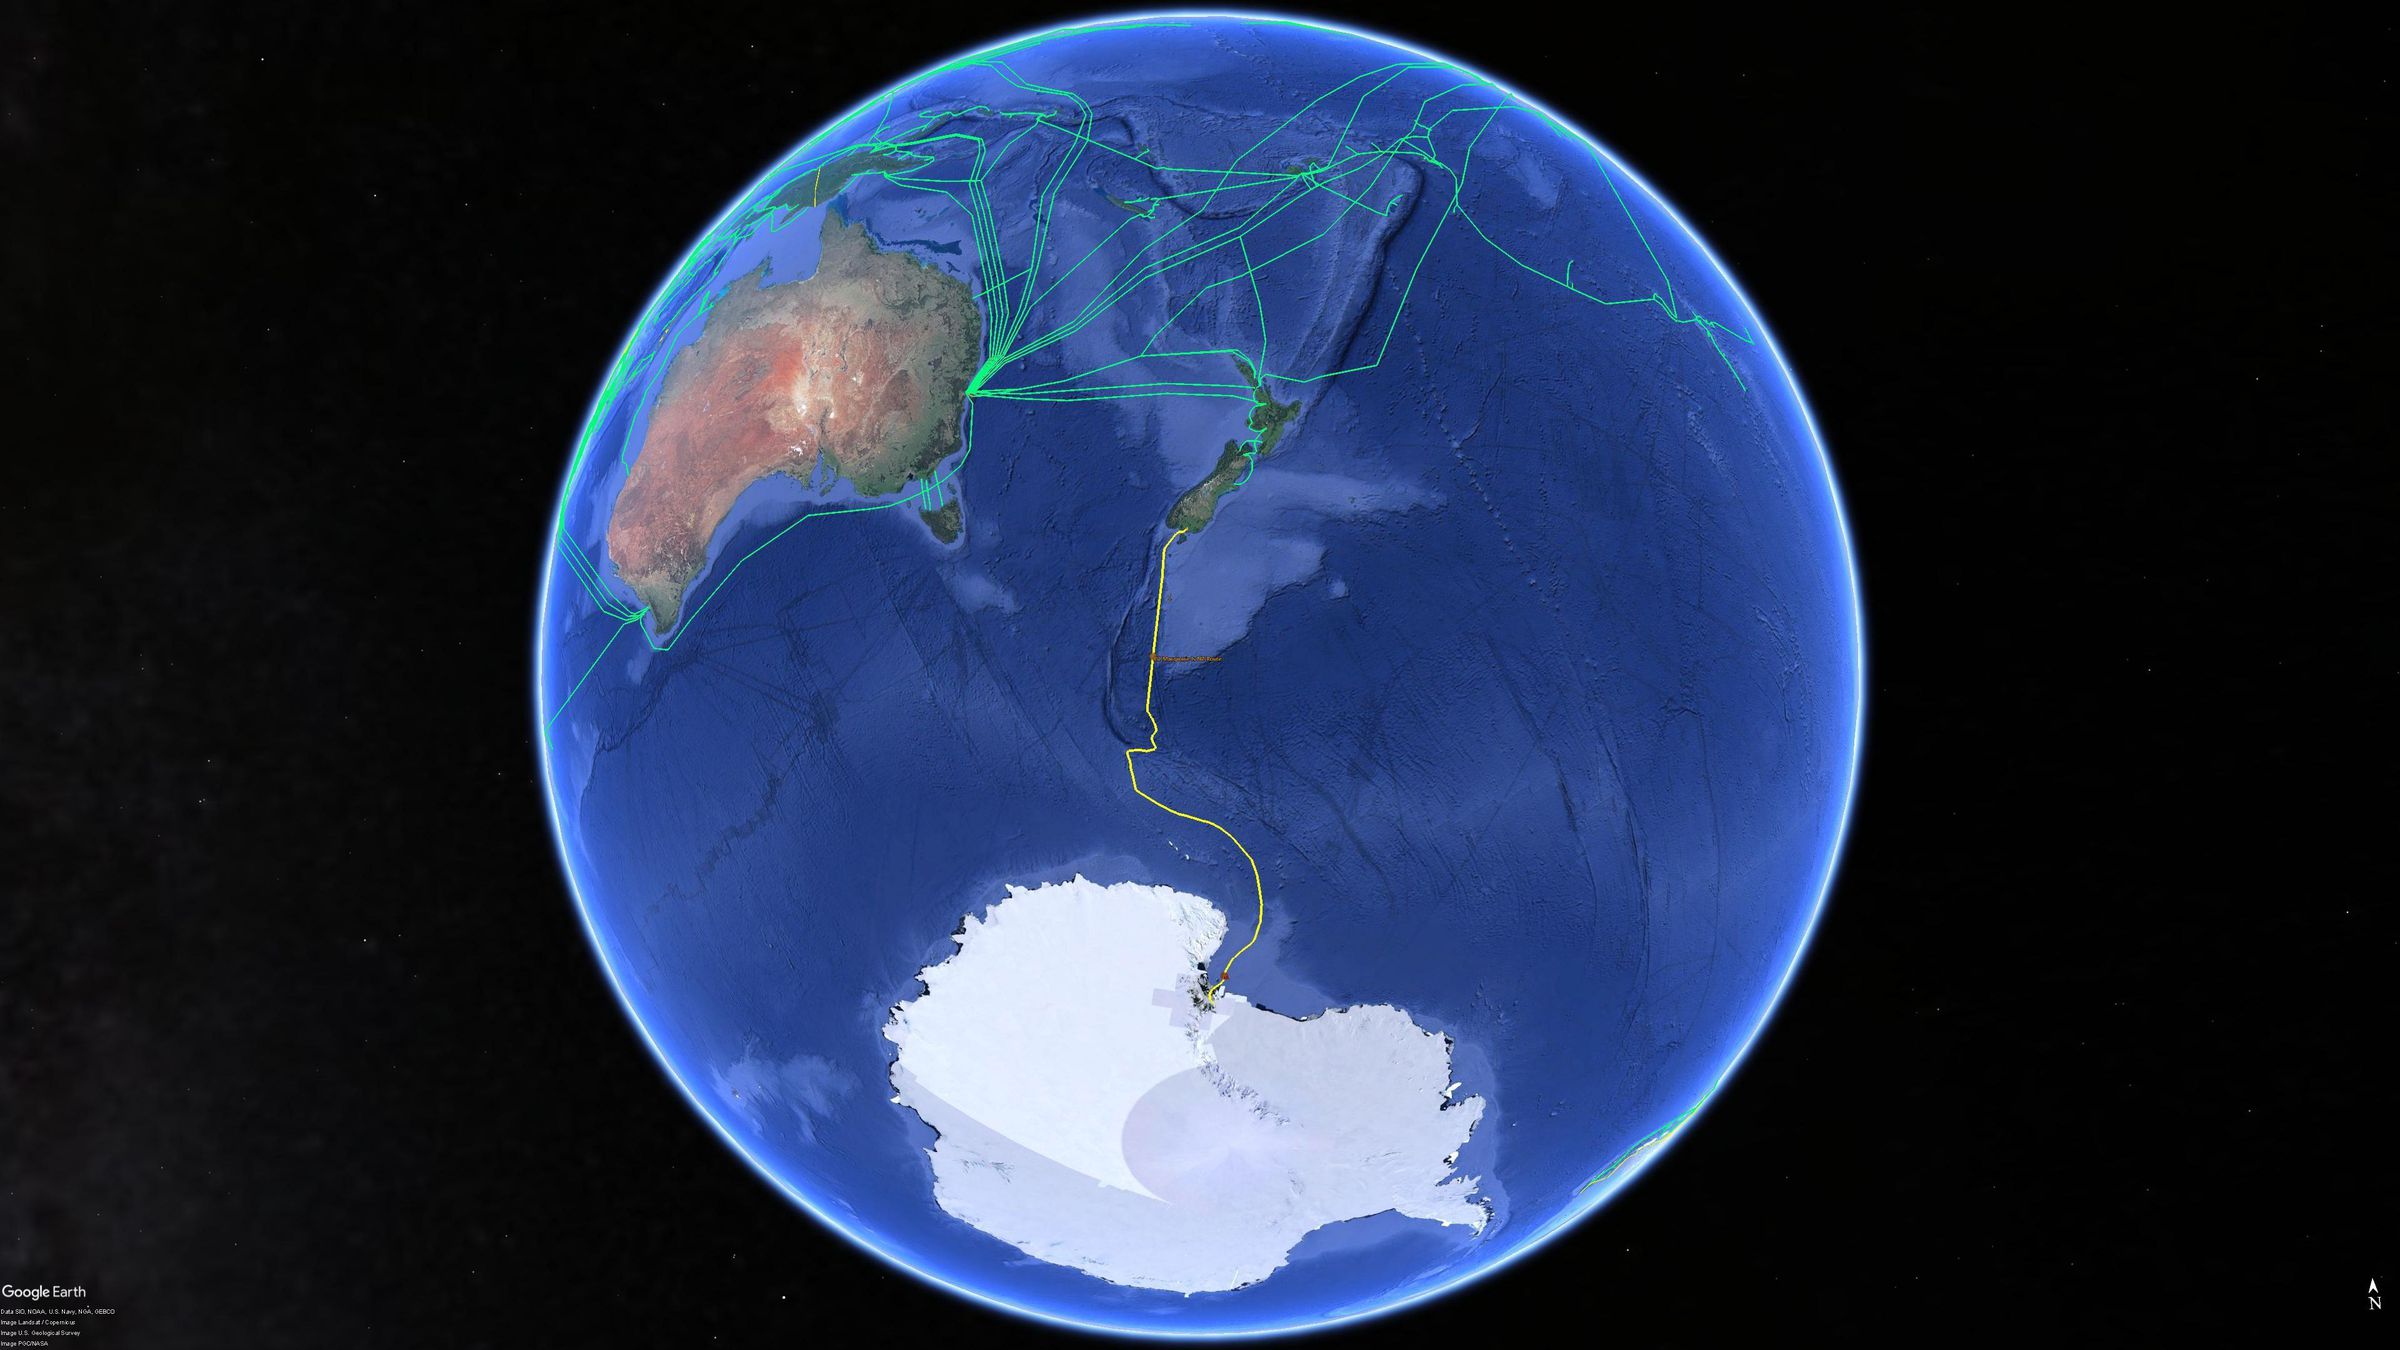 A proposed high-speed fiber line could connect McMurdo Station to New Zealand.